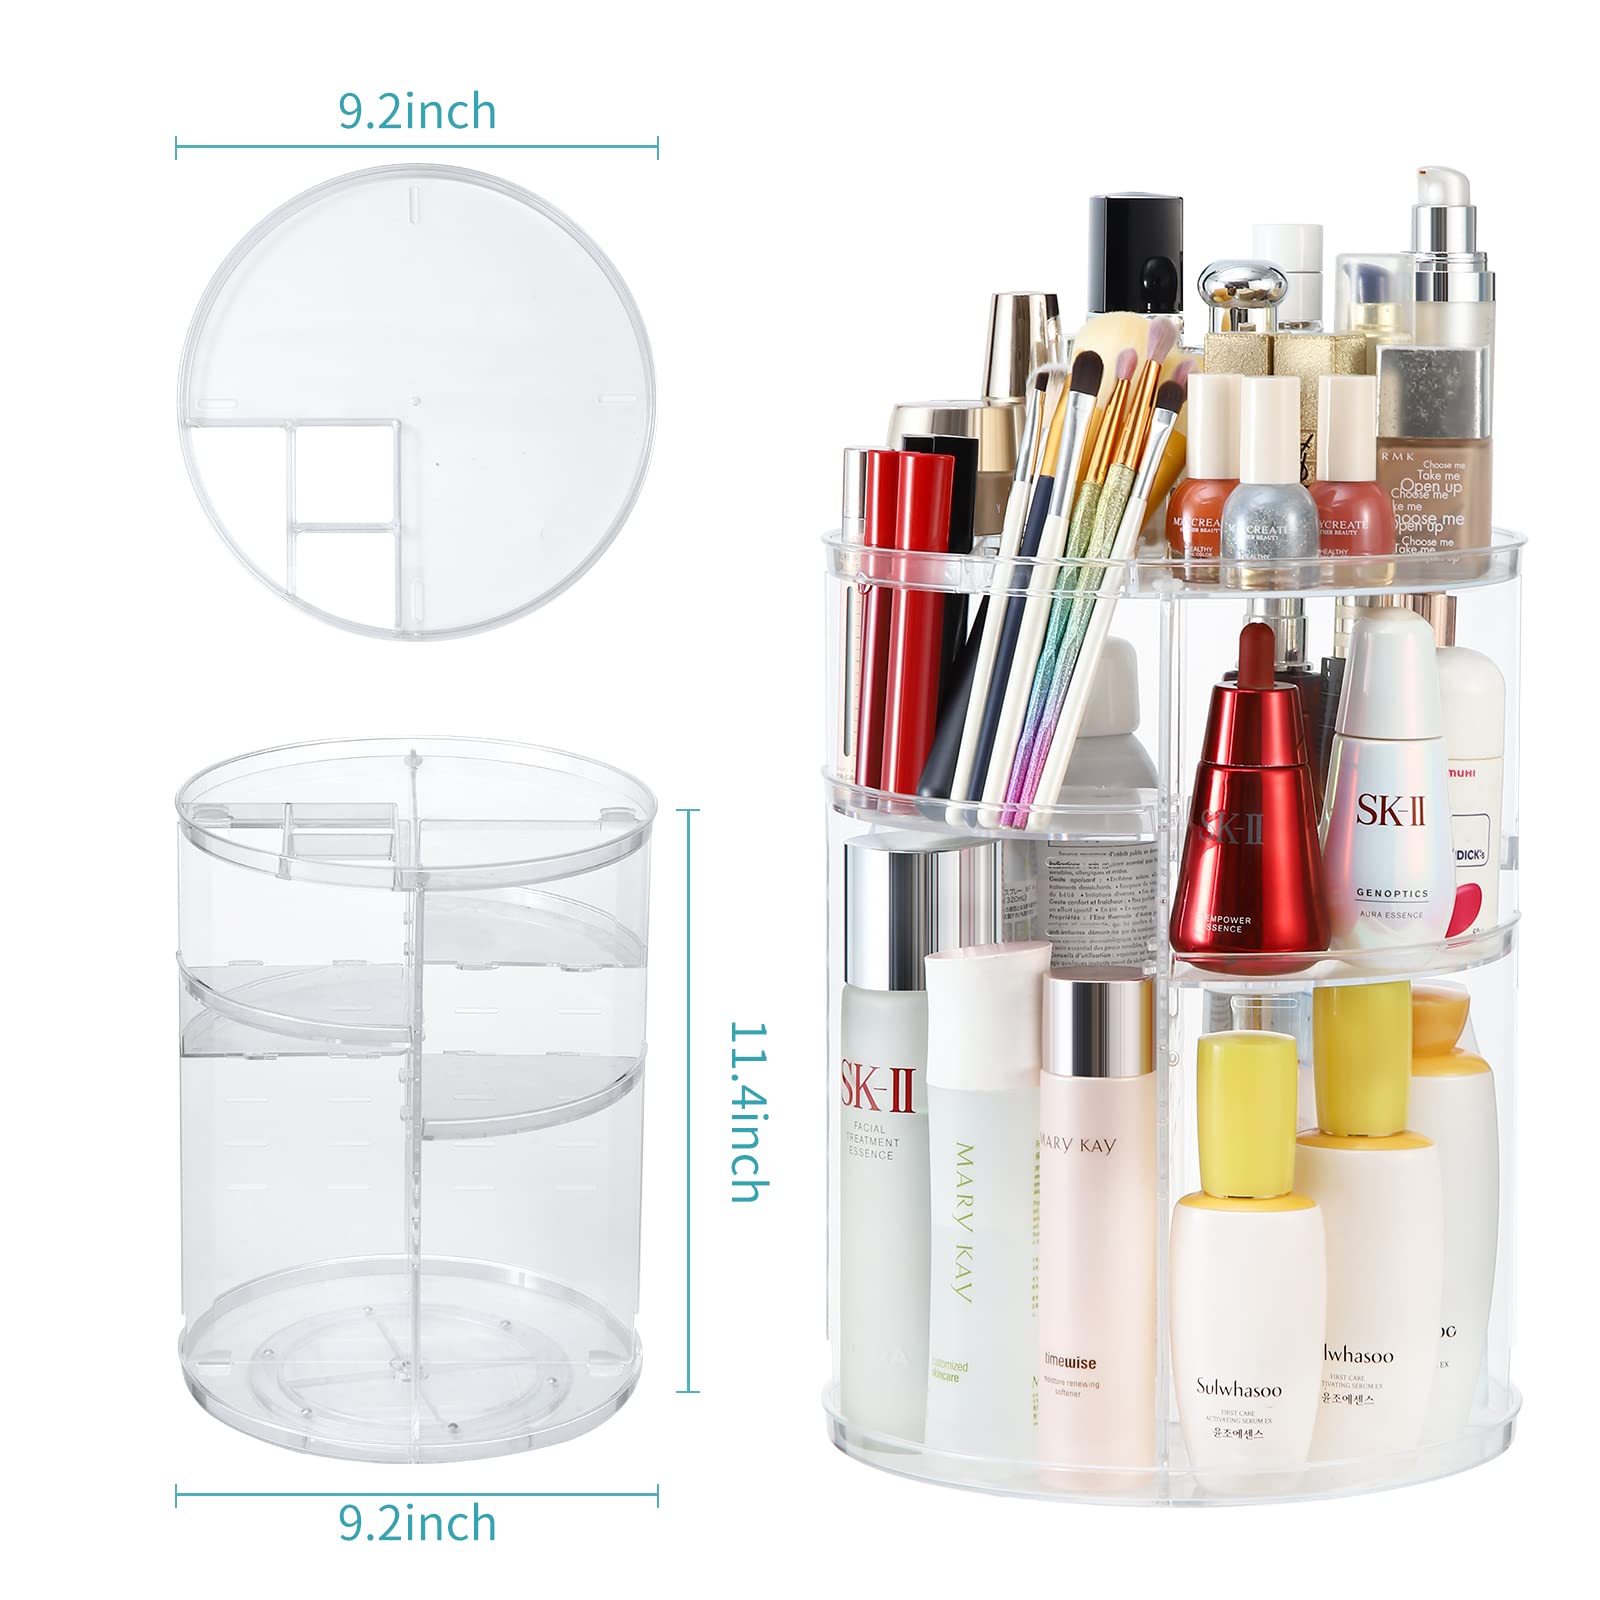 COOLBEAR 360 Rotating Makeup Organizers and Storage, Spinning Cosmetic Display Case with 6 Adjustable Layers for Bathroom Vanity Countertop, Fits Perfume Cream Skincare and More, Clear Acrylic